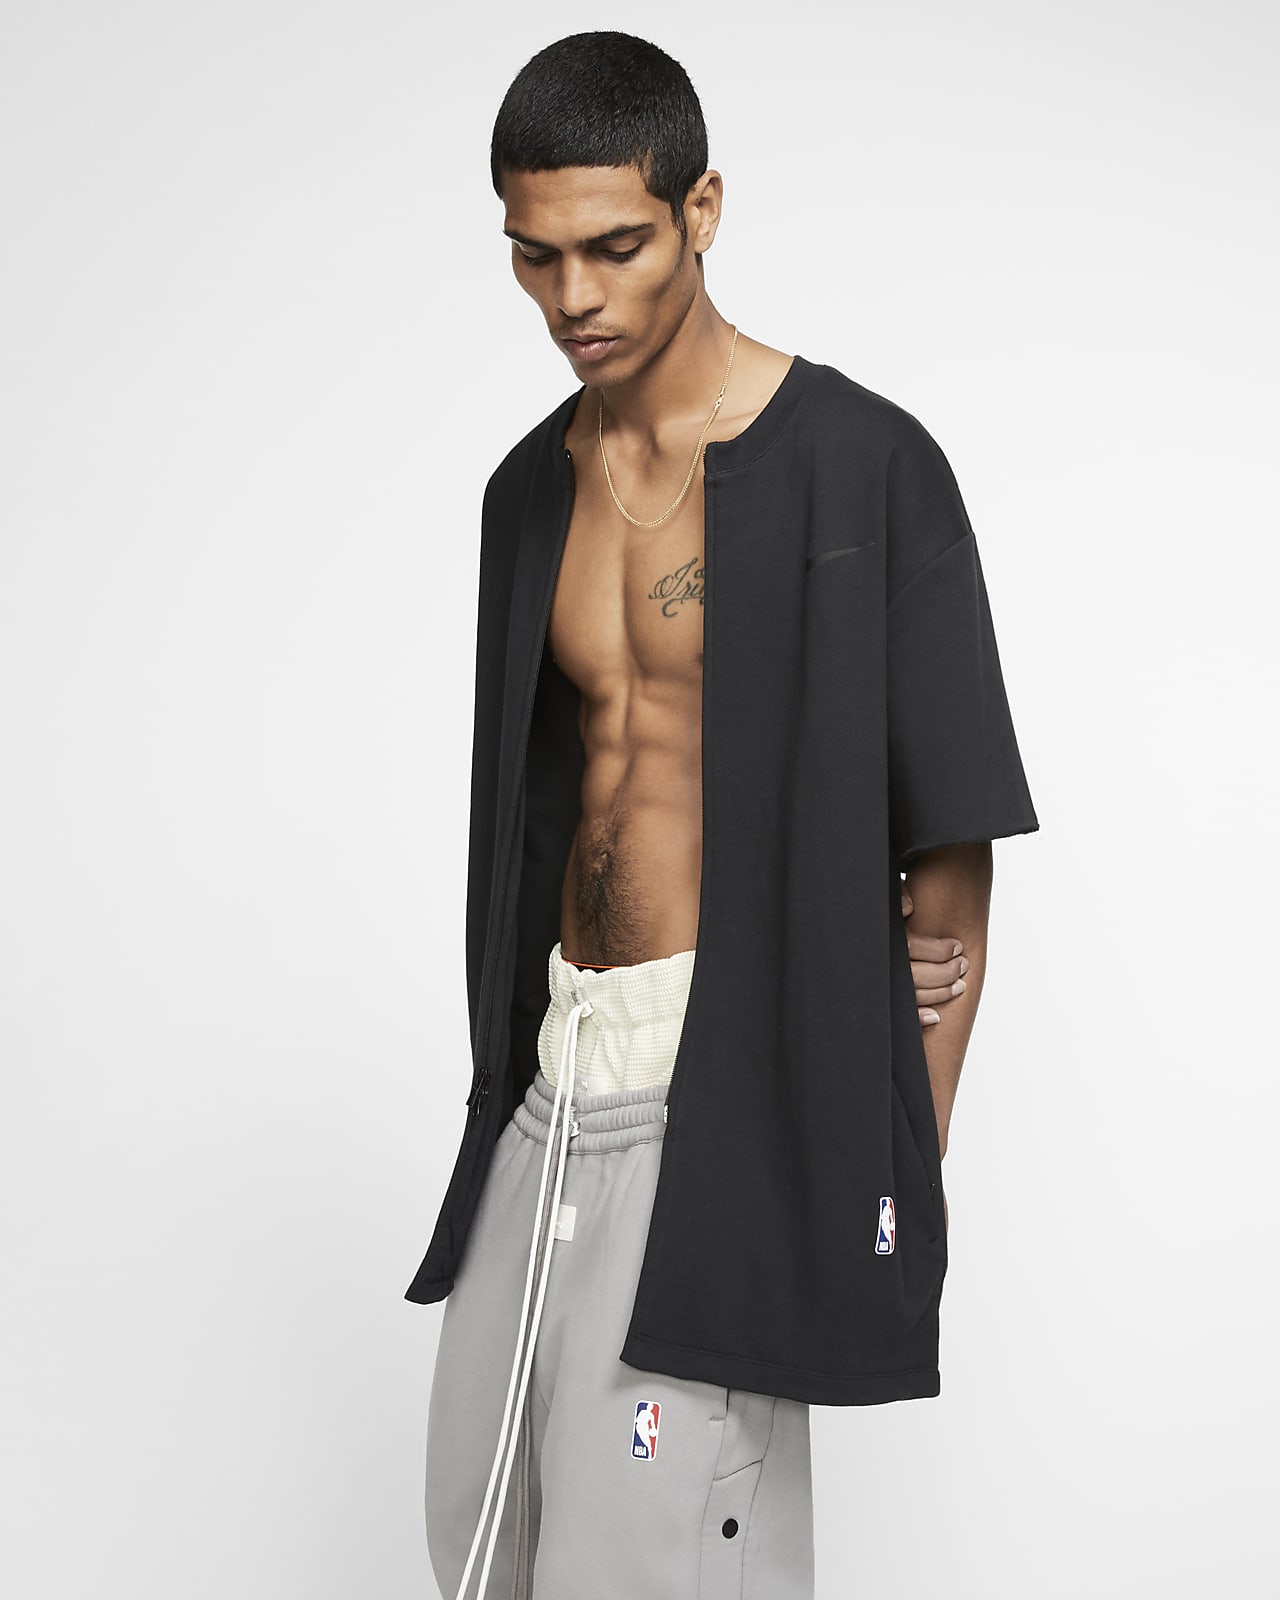 fear of god warm up top cheap online